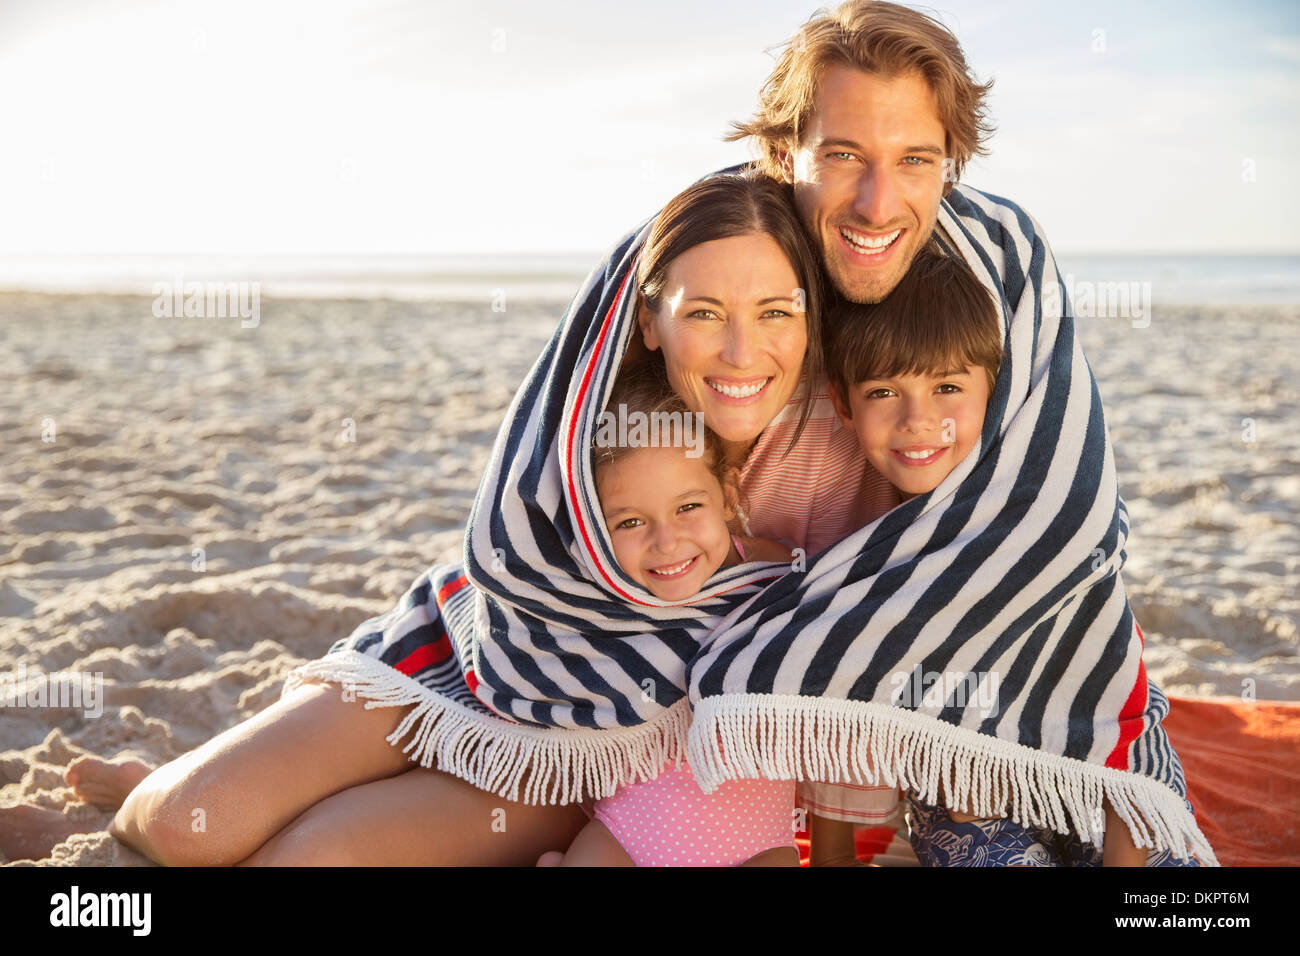 Family wrapped in blanket on beach Stock Photo